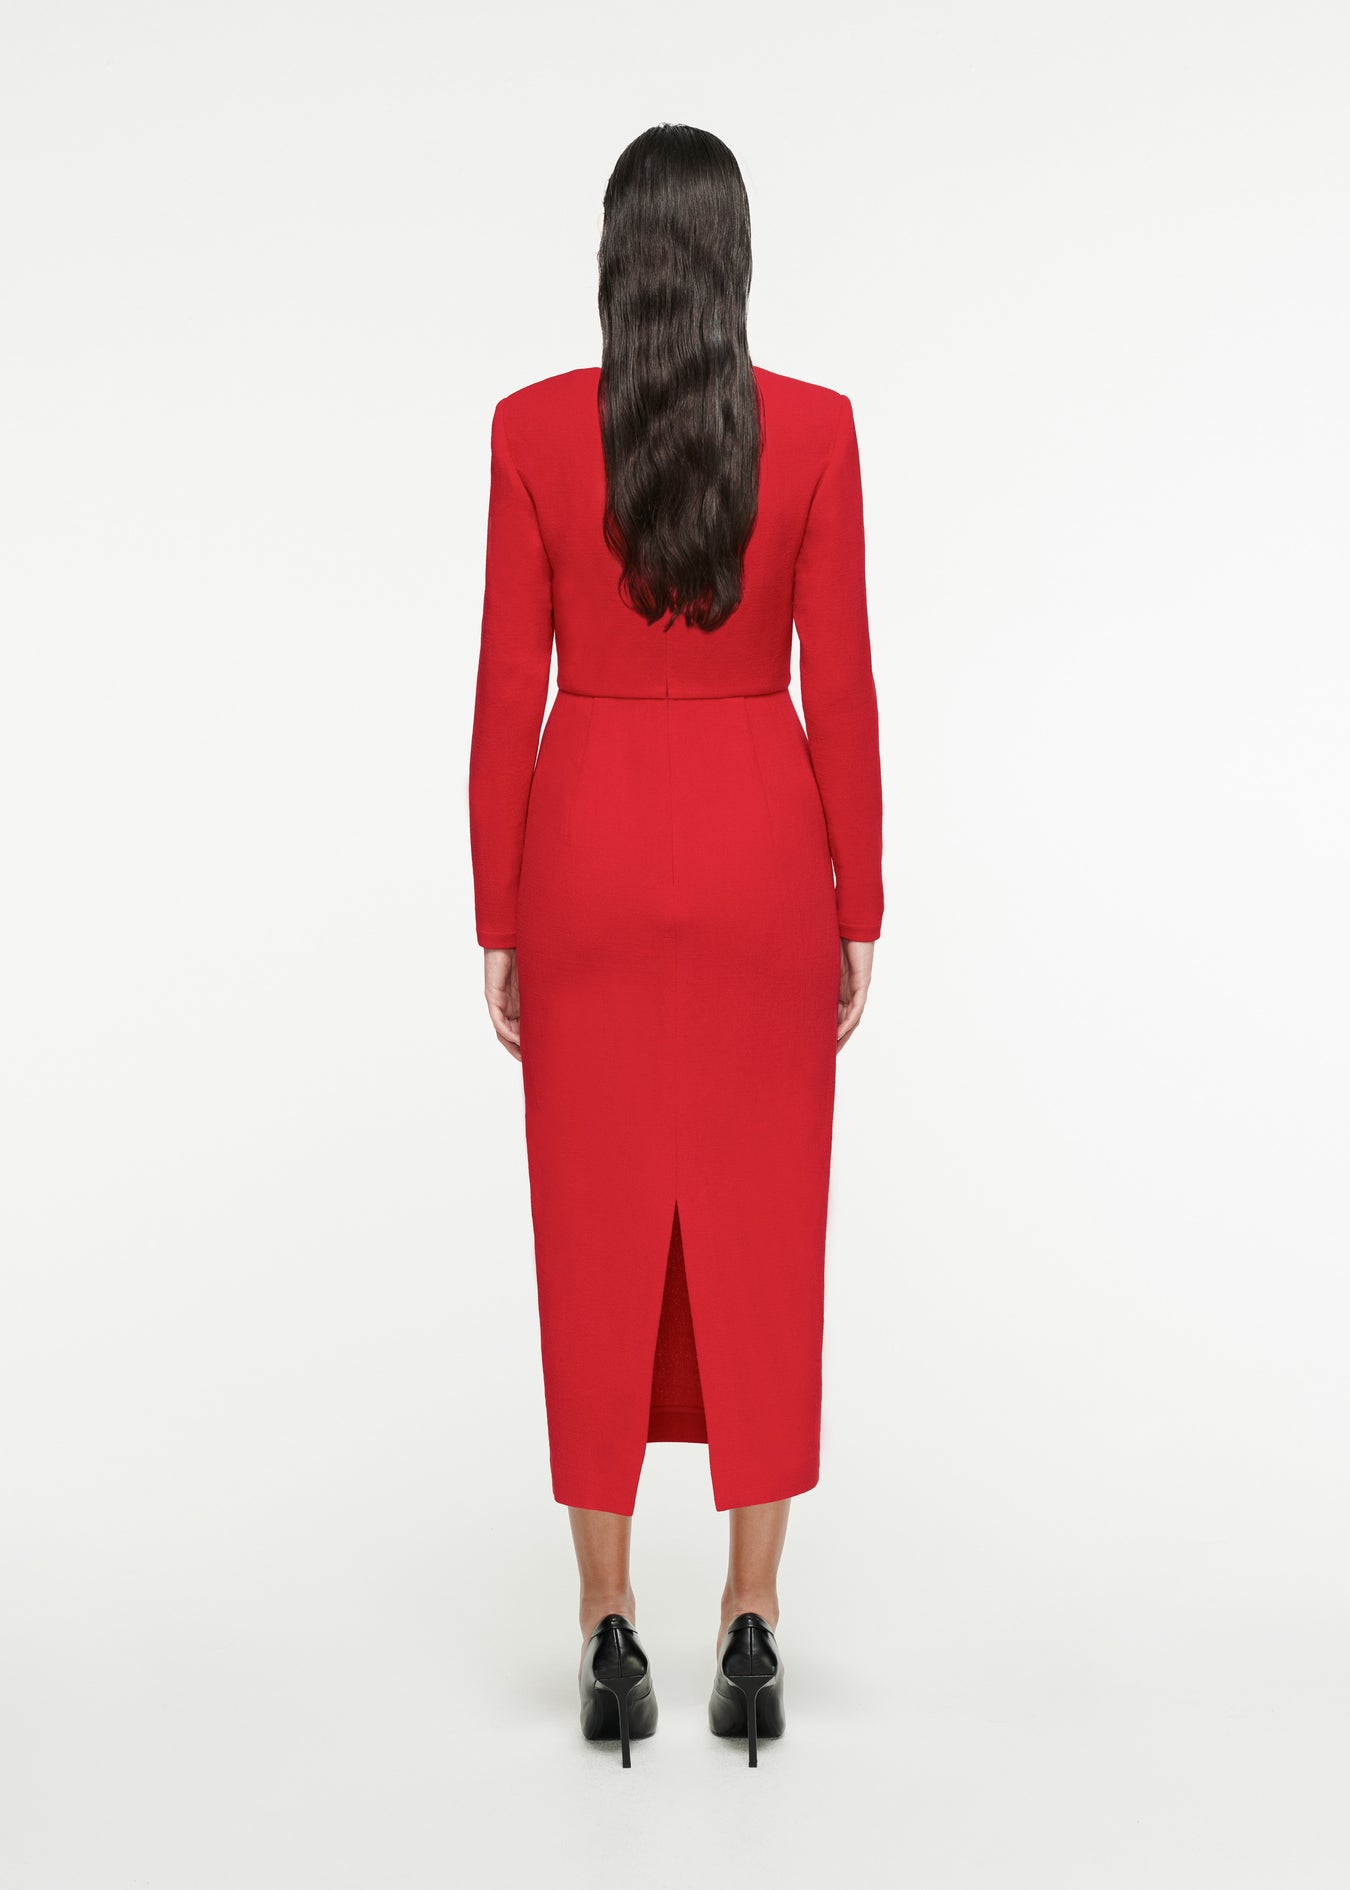 The back of a woman wearing the Long Sleeve Origami Midi Dress in Red